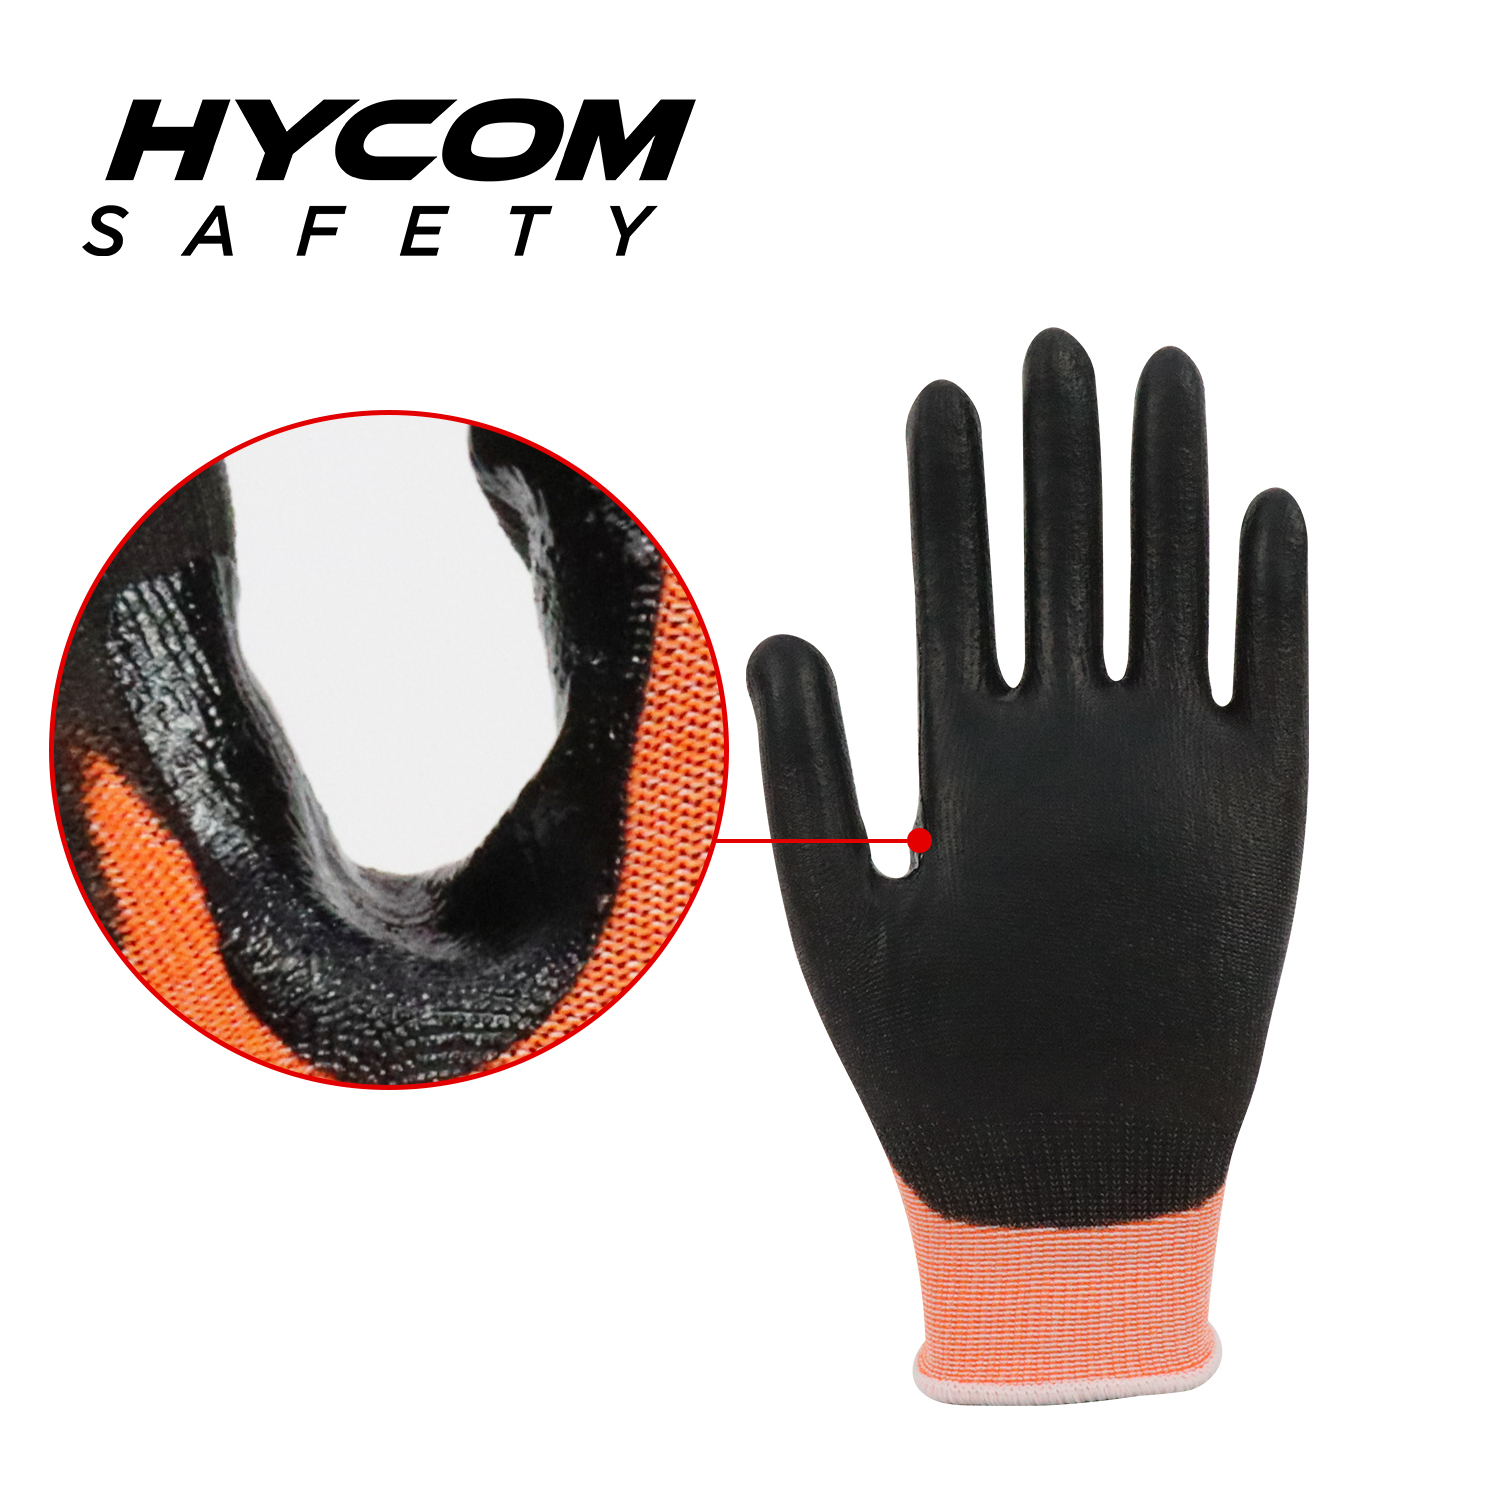 HYCOM 18G ANSI 2 No Steel No Glass Cut Resistant Glove with Palm Polyurethane Coating Reinceforcement at Thumb Crotch PPE Gloves